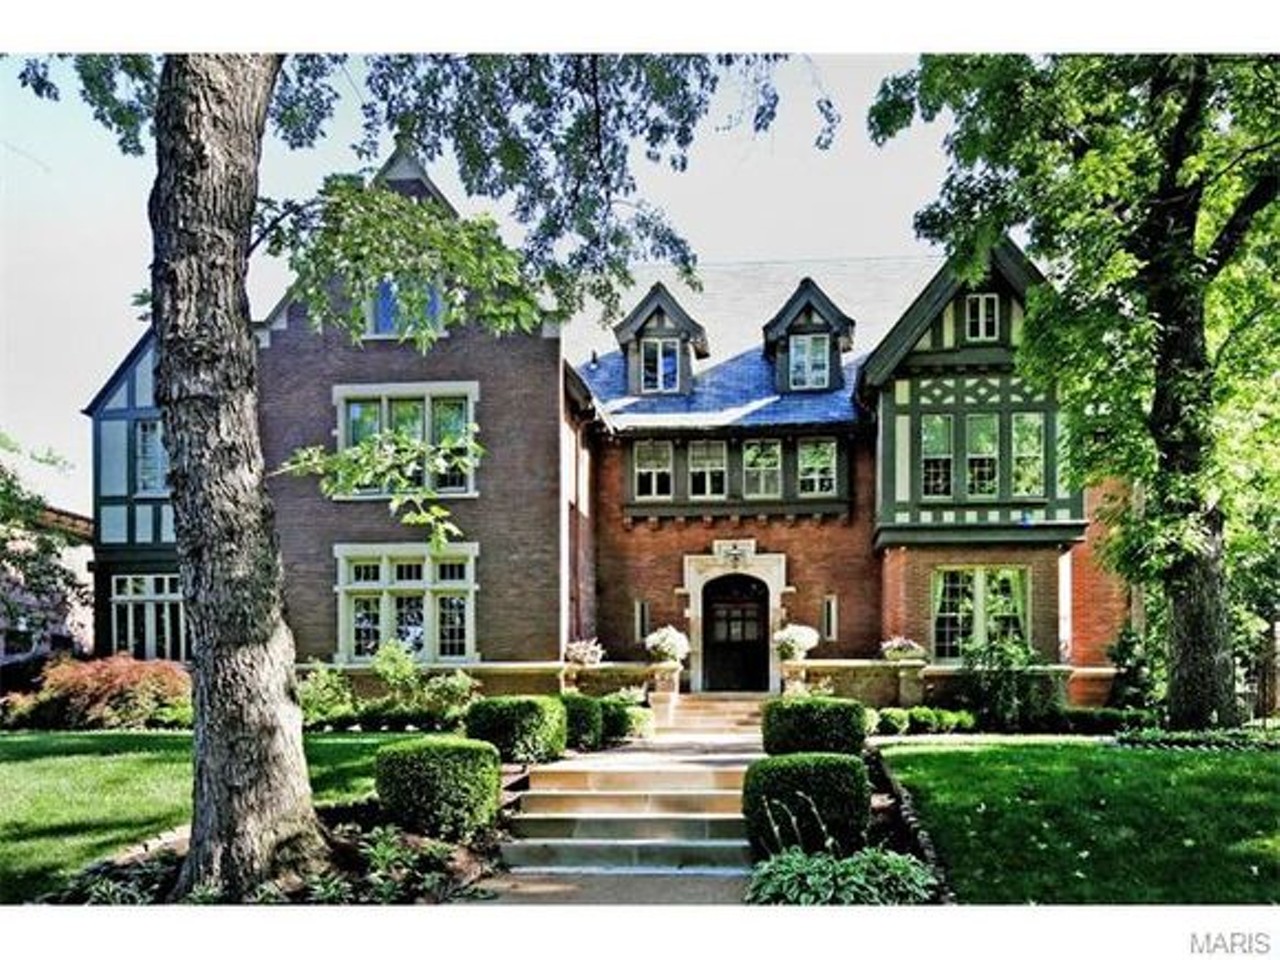 48 Portland Place in the DeBaliviere Place neighborhood has Tudor Revival charm out the yin-yang, with 7 beds, 8 baths and just under 9,000 square feet. On the market for $1,790,000.